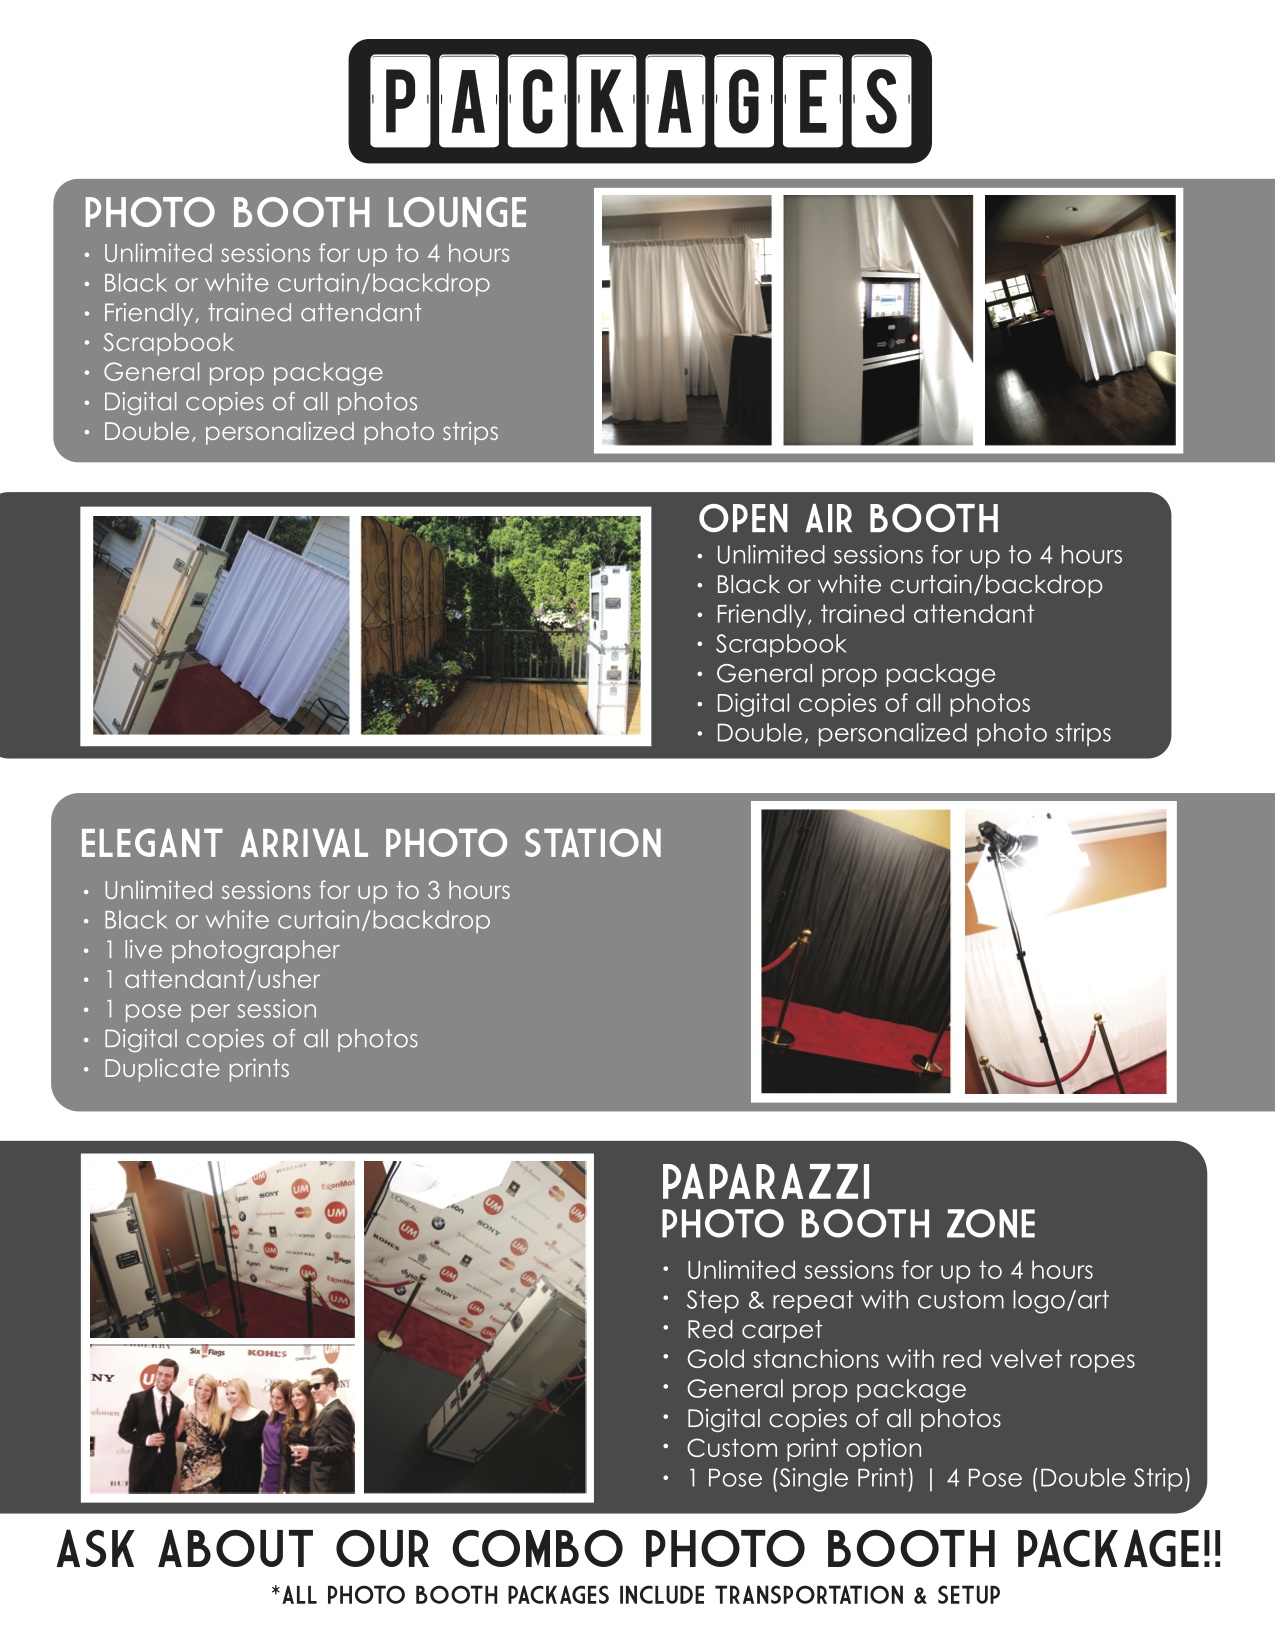 TFE Photo Booth Info - Packages